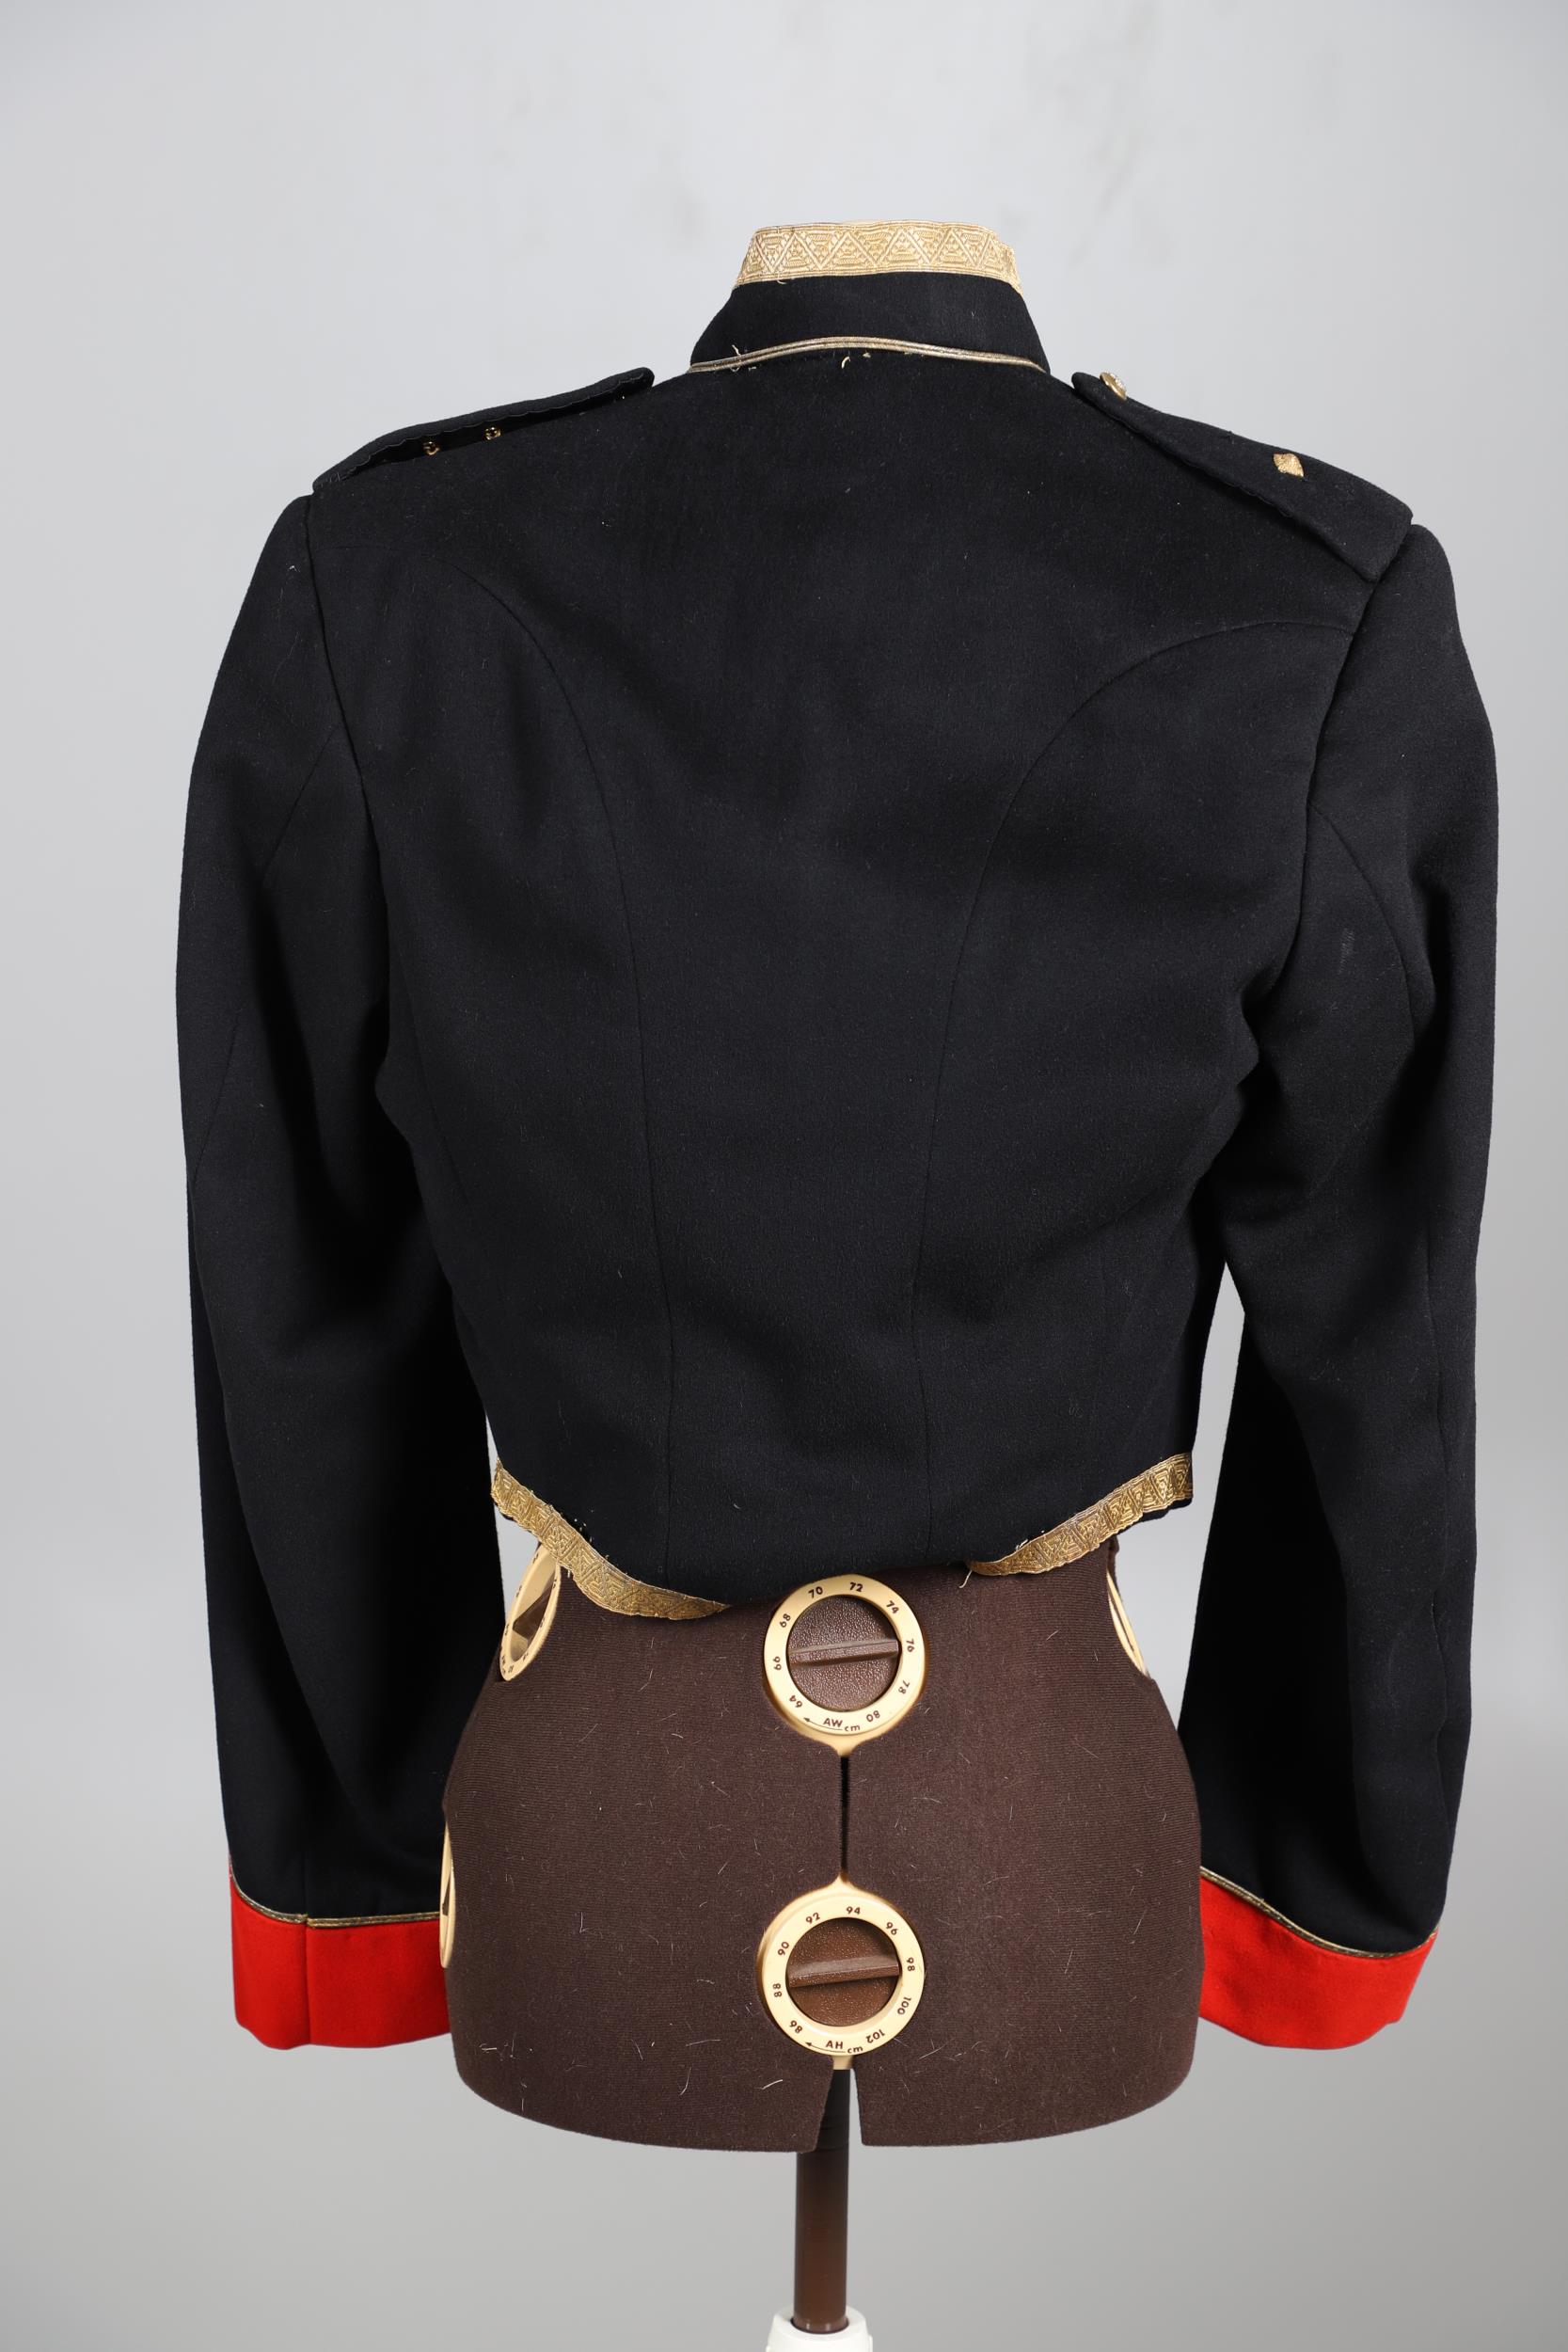 A POST SECOND WORLD WAR MESS JACKET AND BLUES UNIFORM FOR THE 15/19TH HUSSARS. - Image 22 of 34